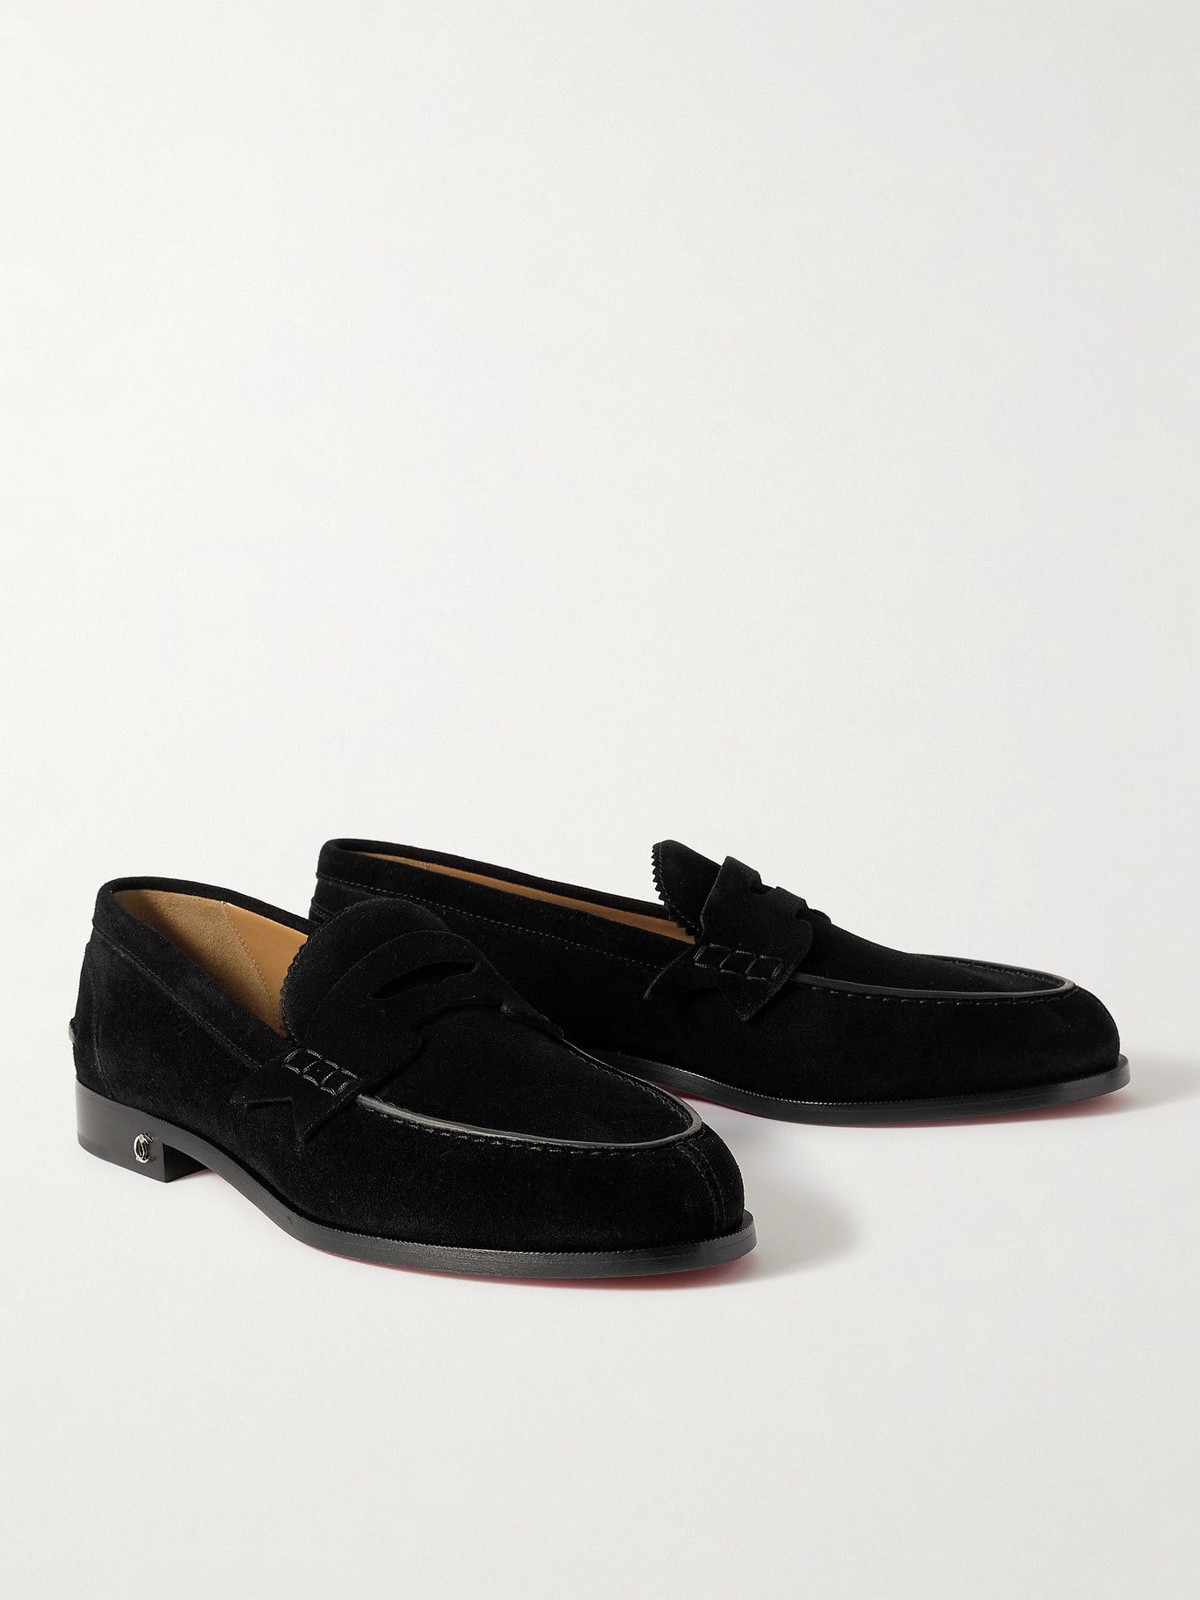 Penny No Back Suede And Croc Effect Loafers in Black - Christian Louboutin